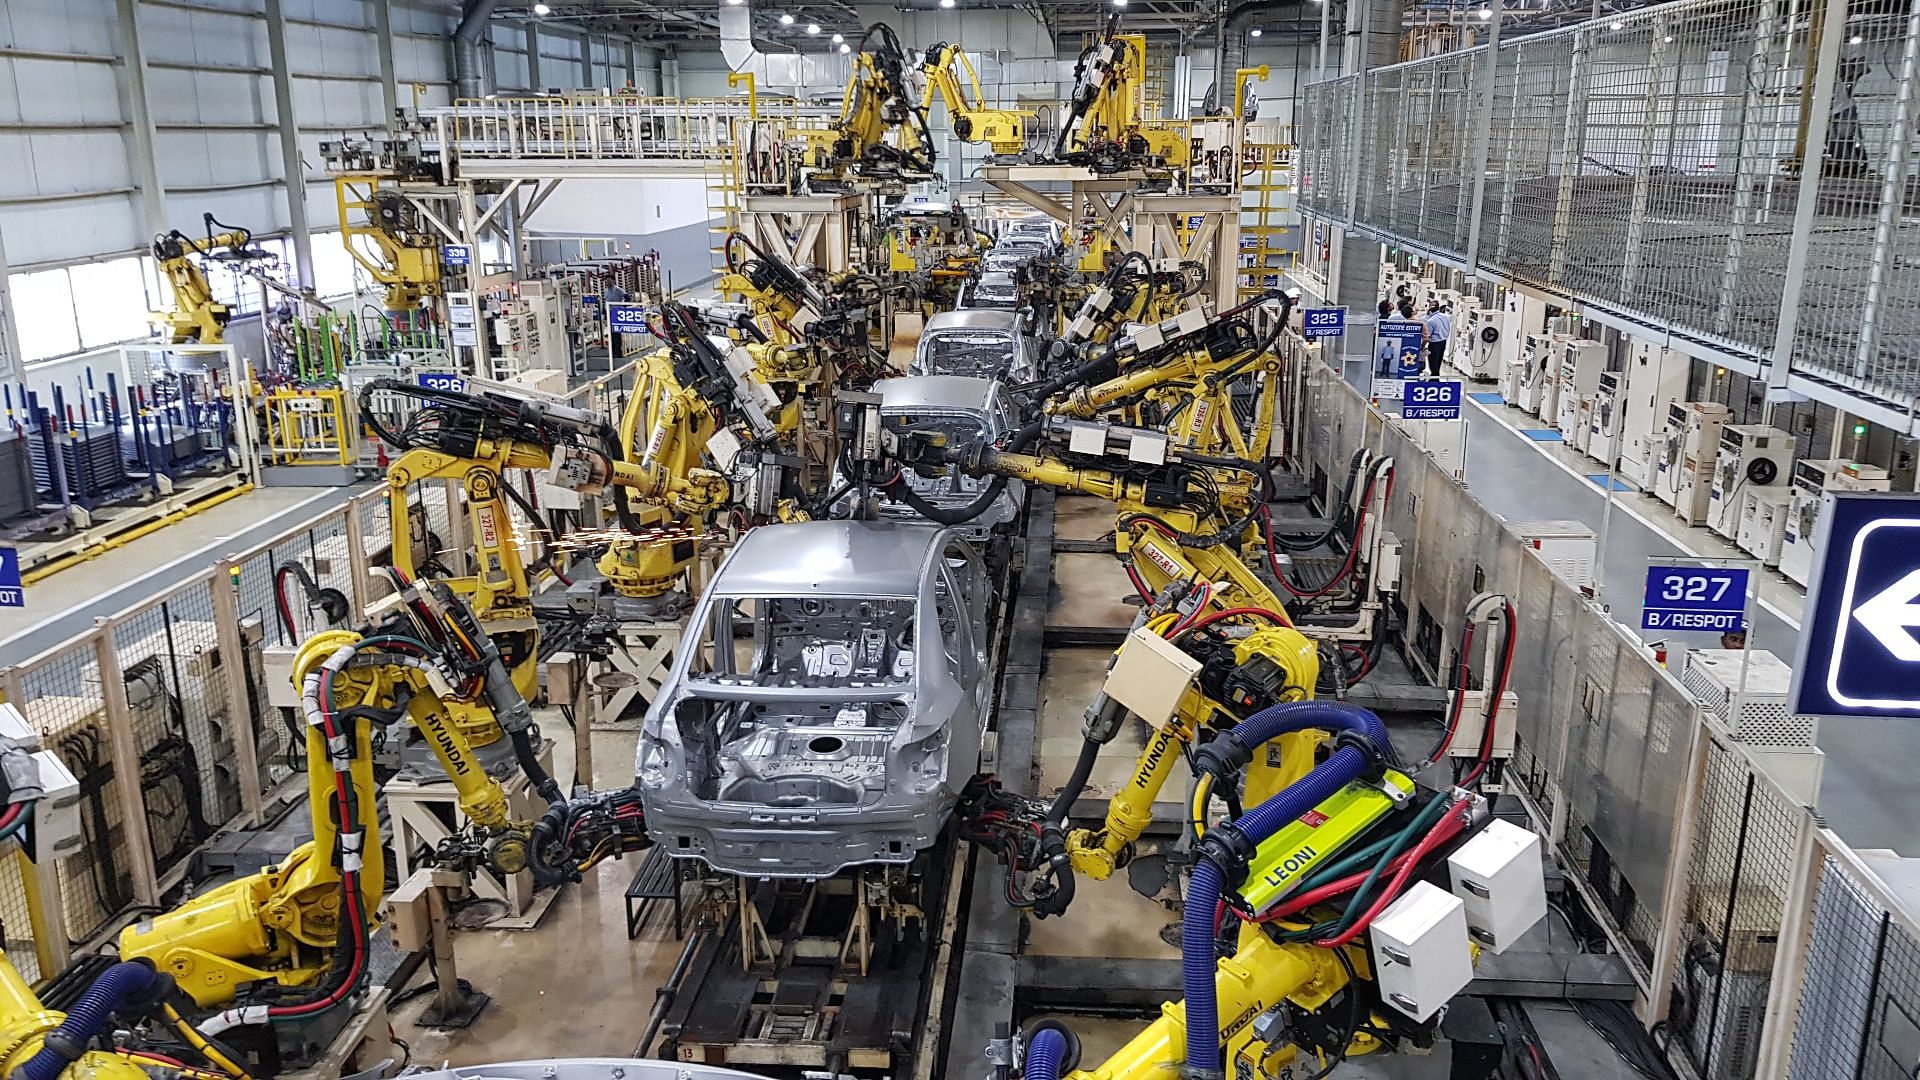 Hyundai has stopped production at its Chennai plant from 23 March until further notice to stem spread of COVID-19.